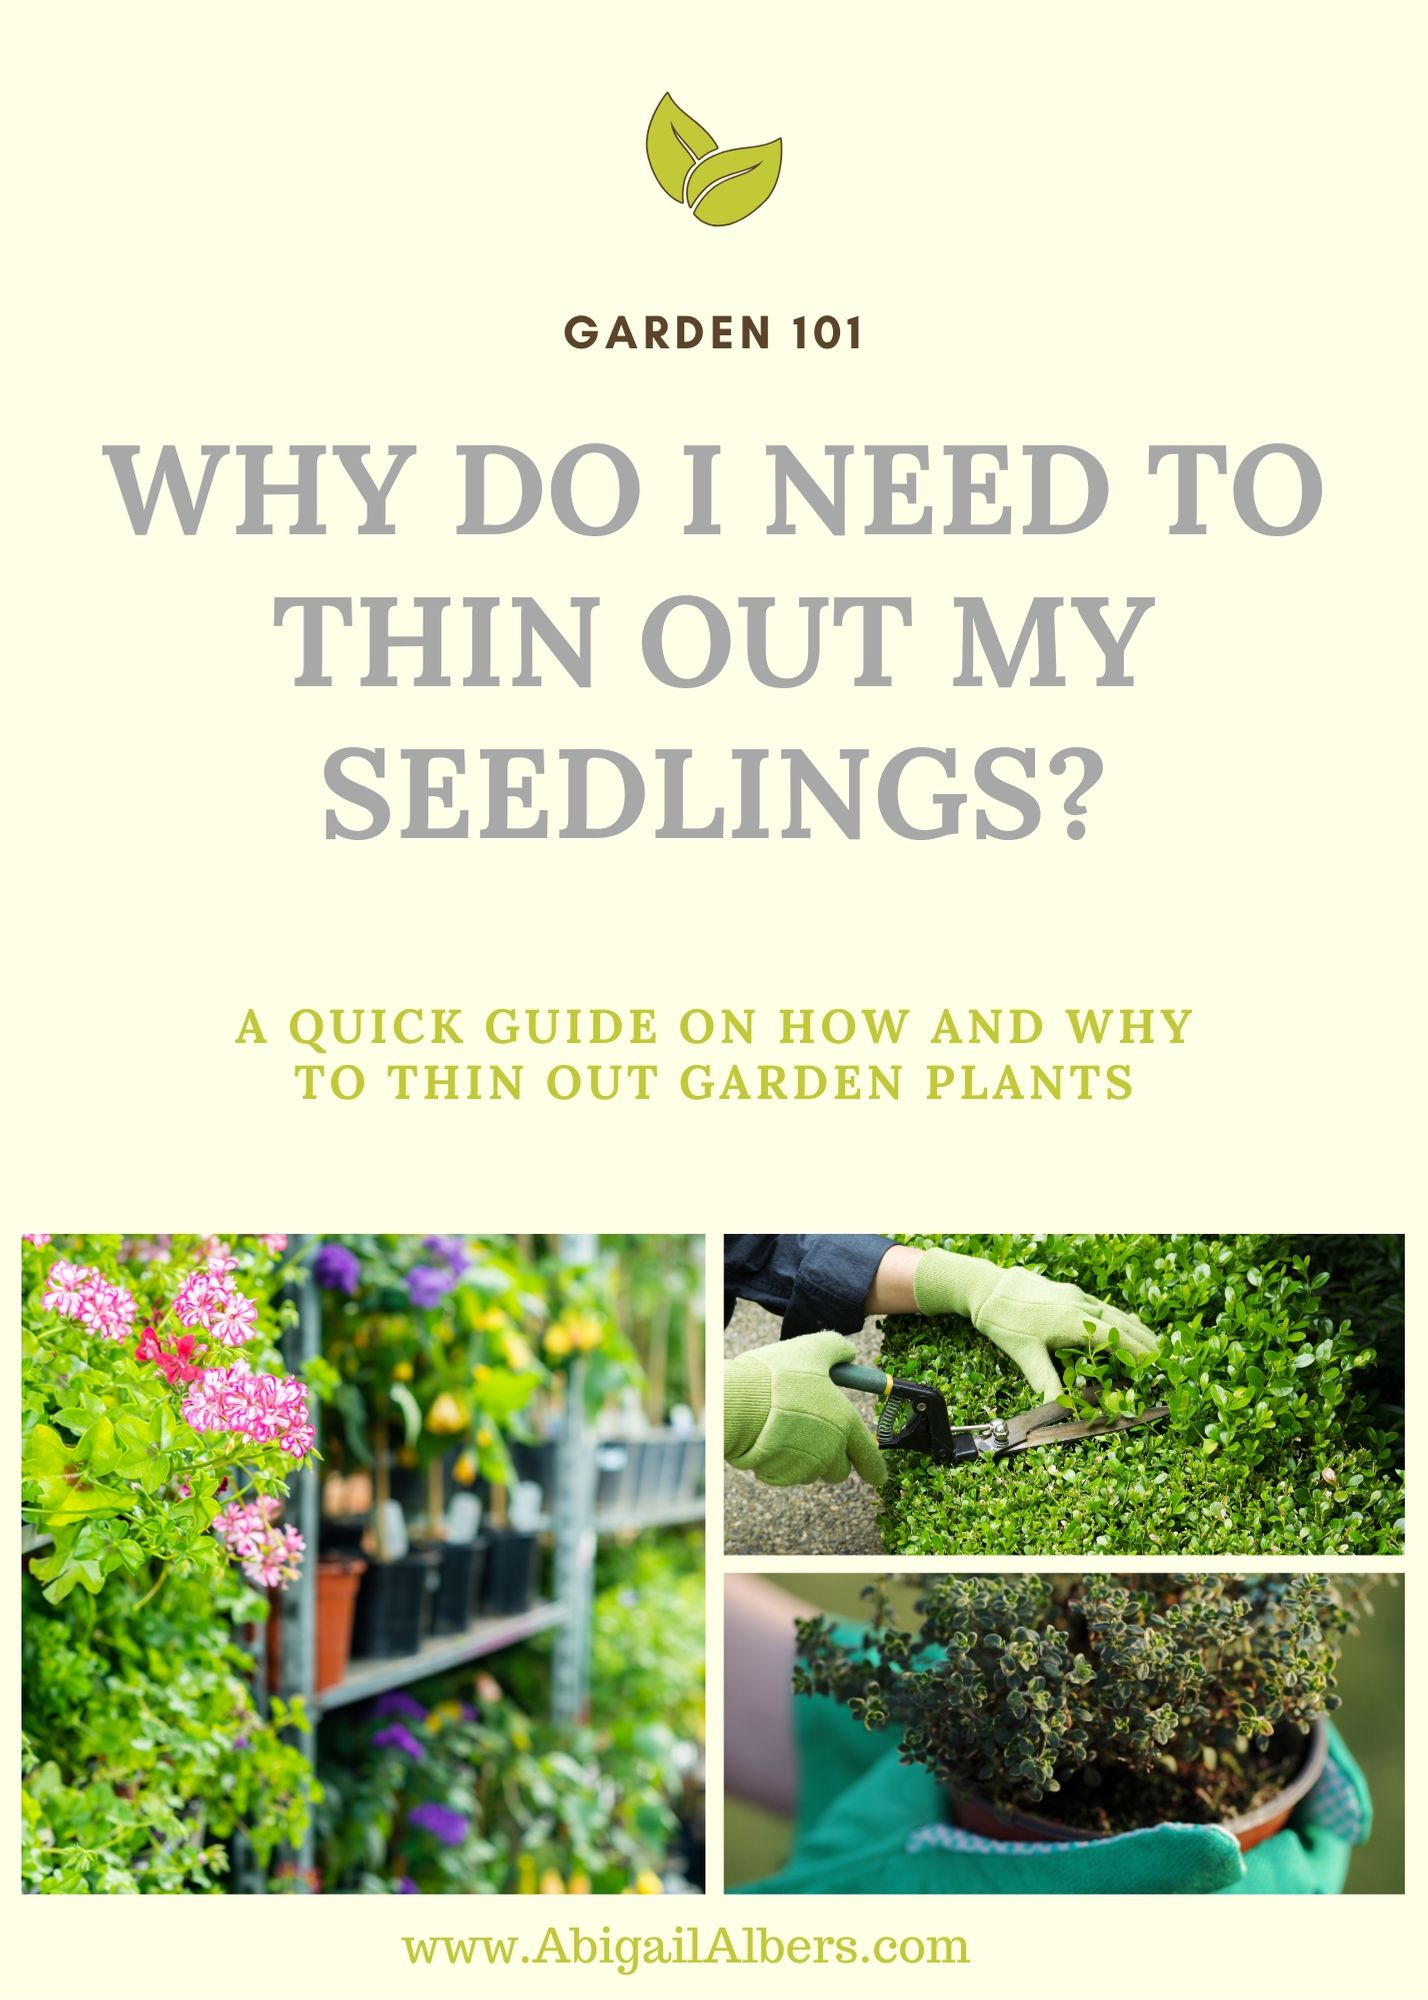 Why do I need to thin my seedlings